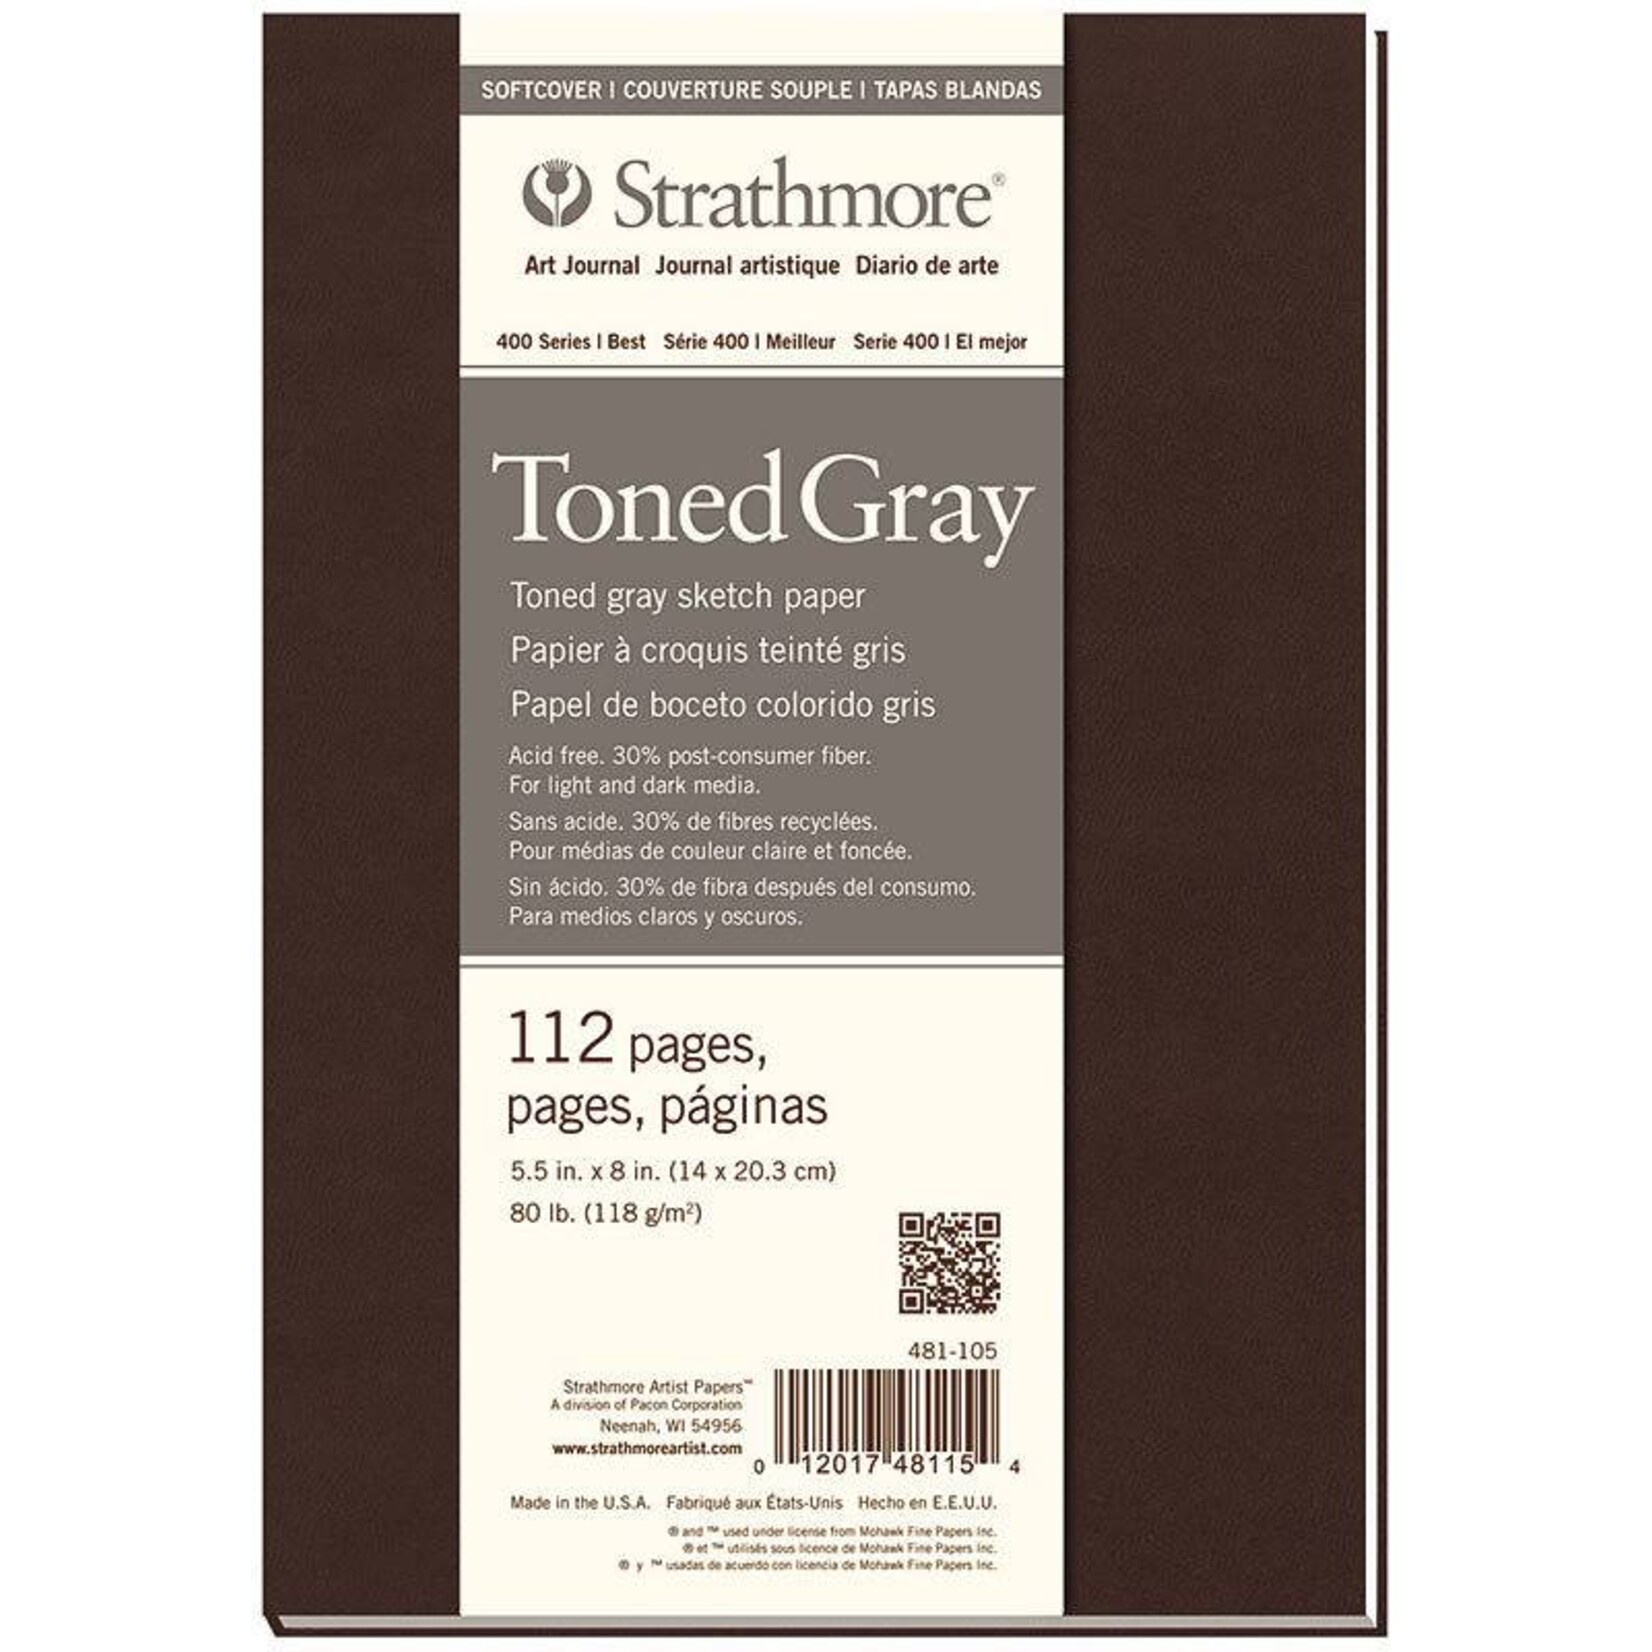 STRATHMORE STRATHMORE TONED GRAY SKETCH PAPER PAD SOFT COVER 5.5X8